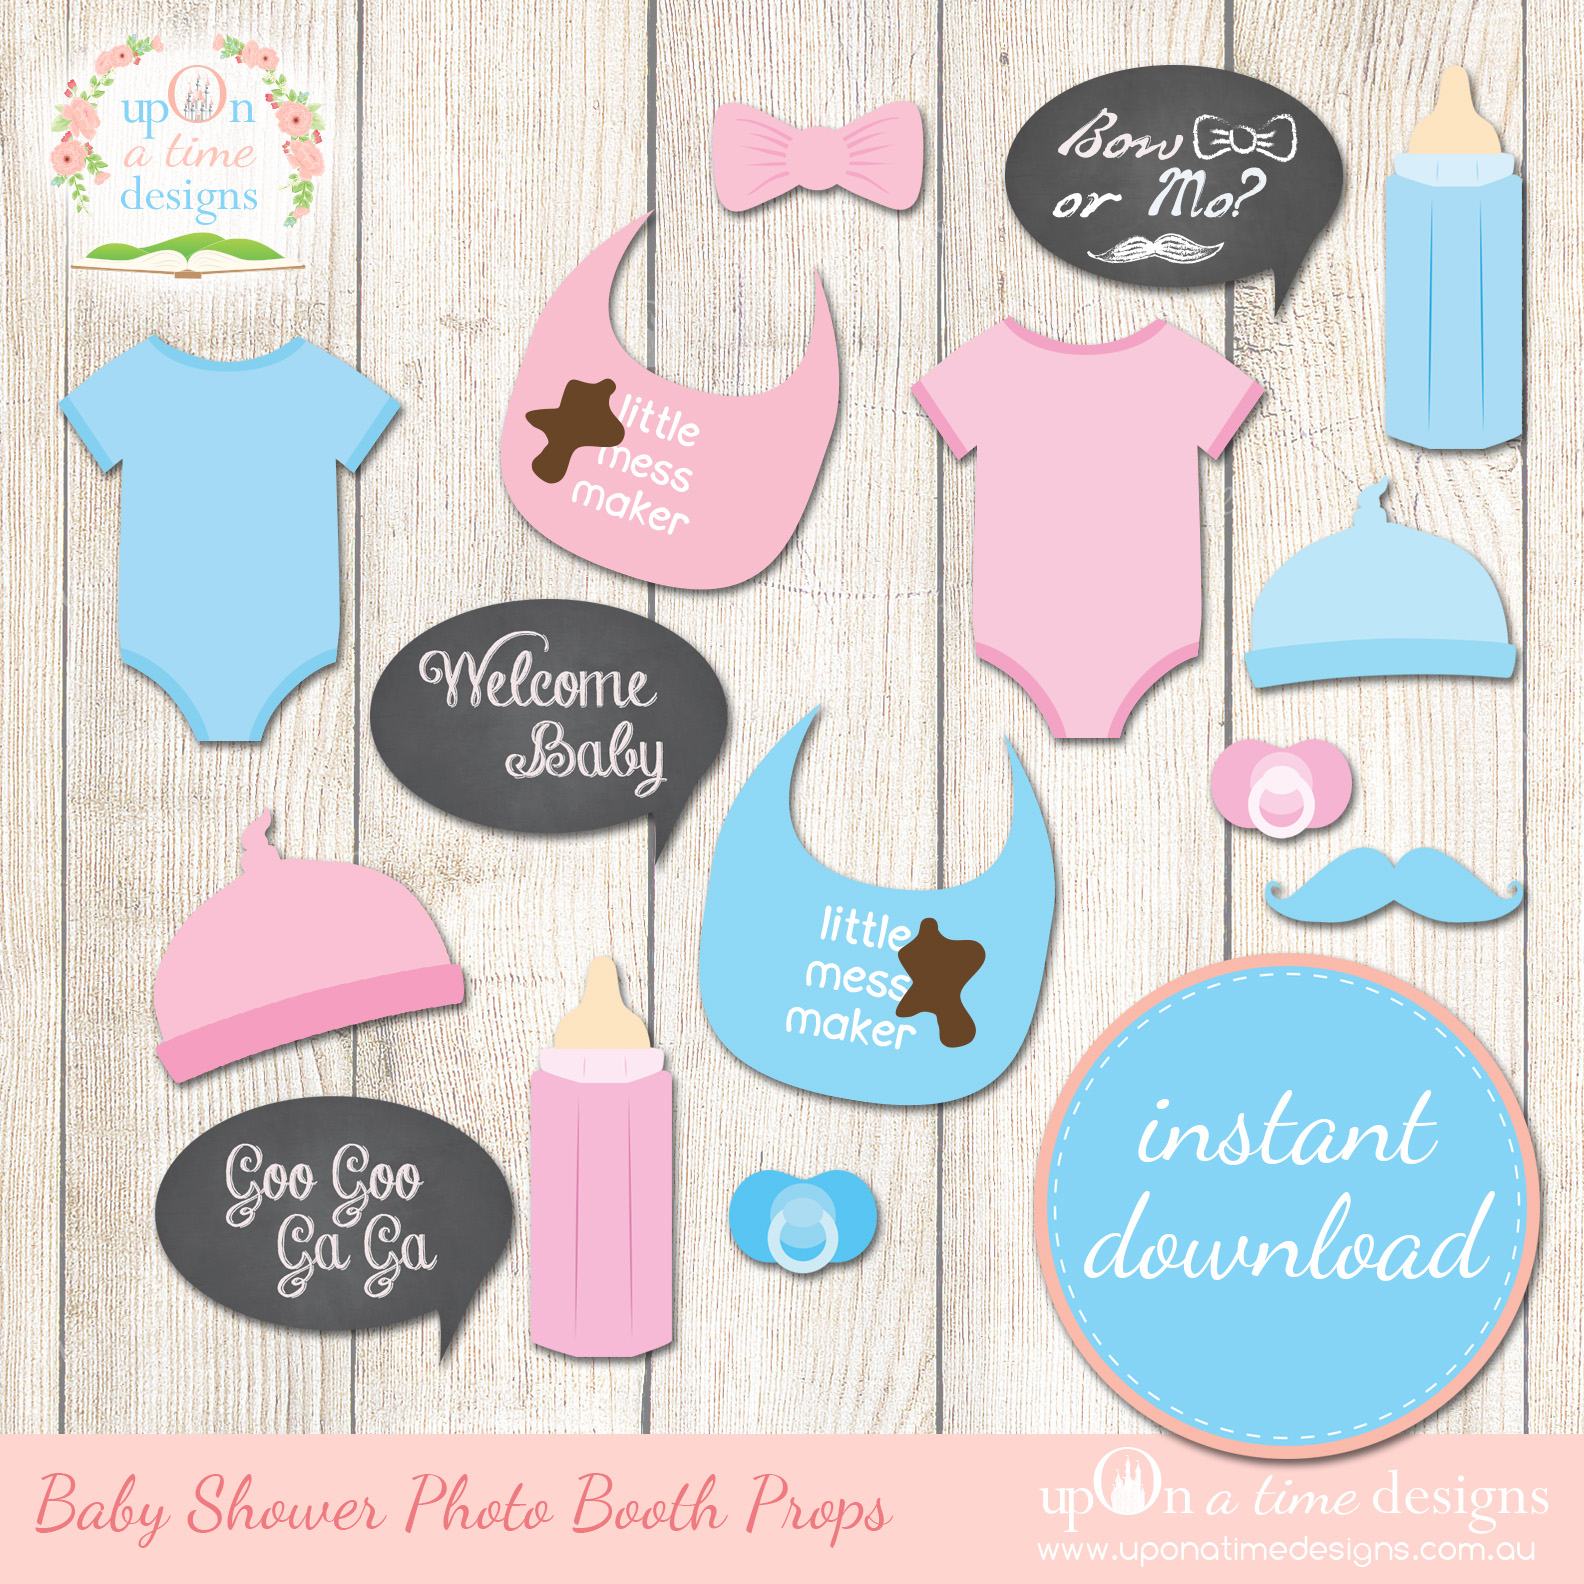 8 Best Images Of Free Printable Baby Shower Props Booth Kohler - Free Printable Baby Shower Photo Booth Props